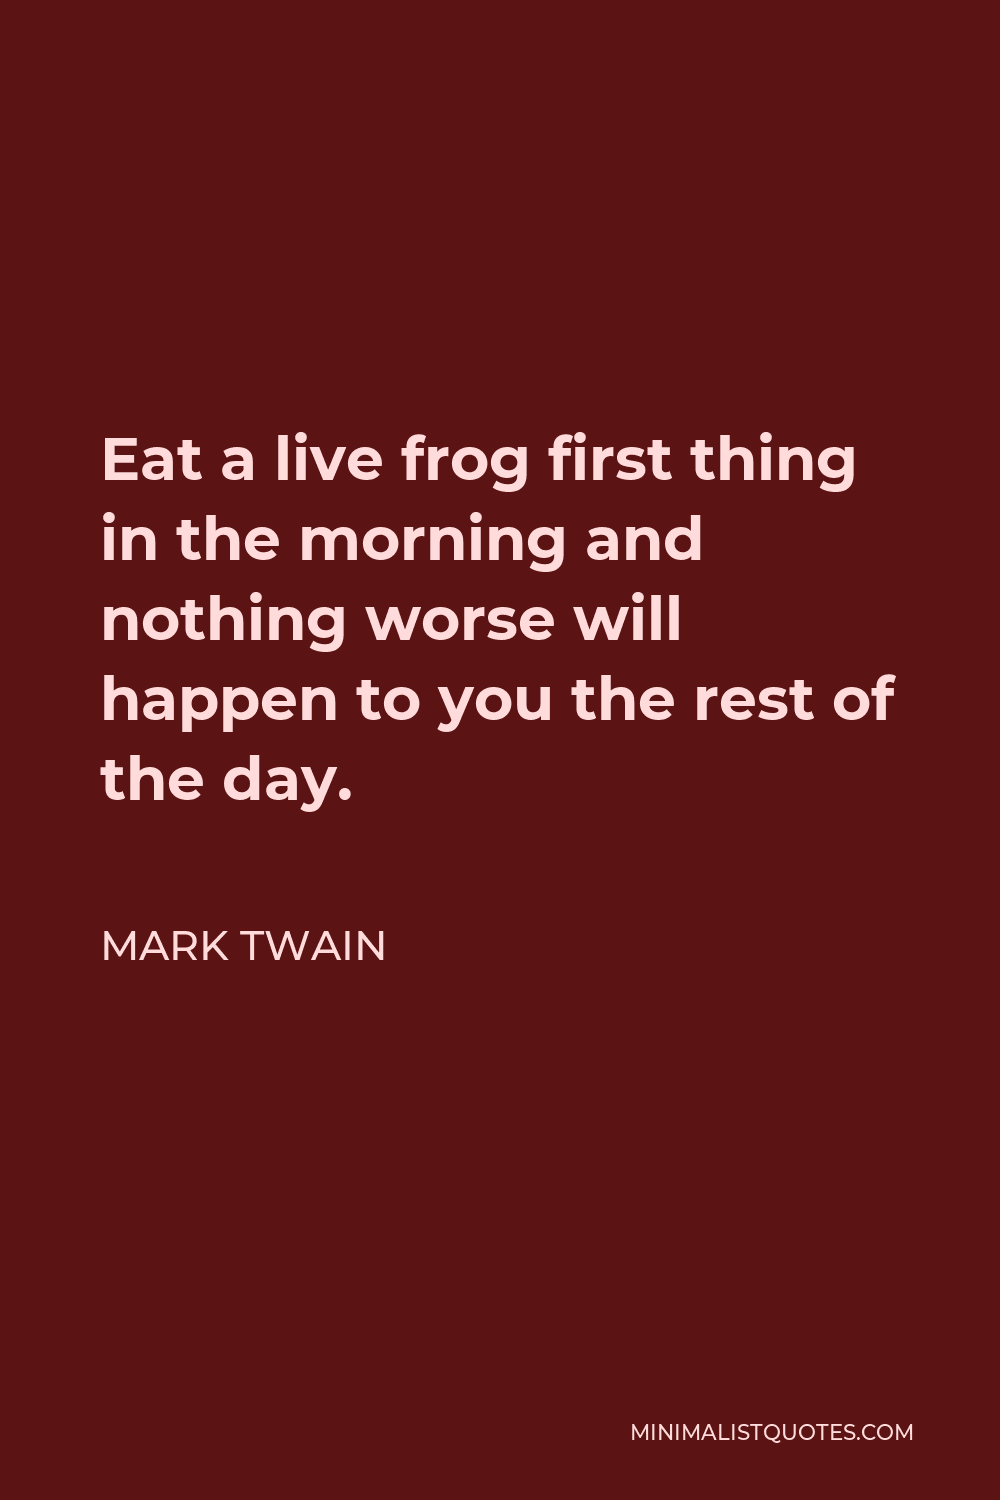 Mark Twain Quote - Eat a live frog first thing in the morning and nothing worse will happen to you the rest of the day.